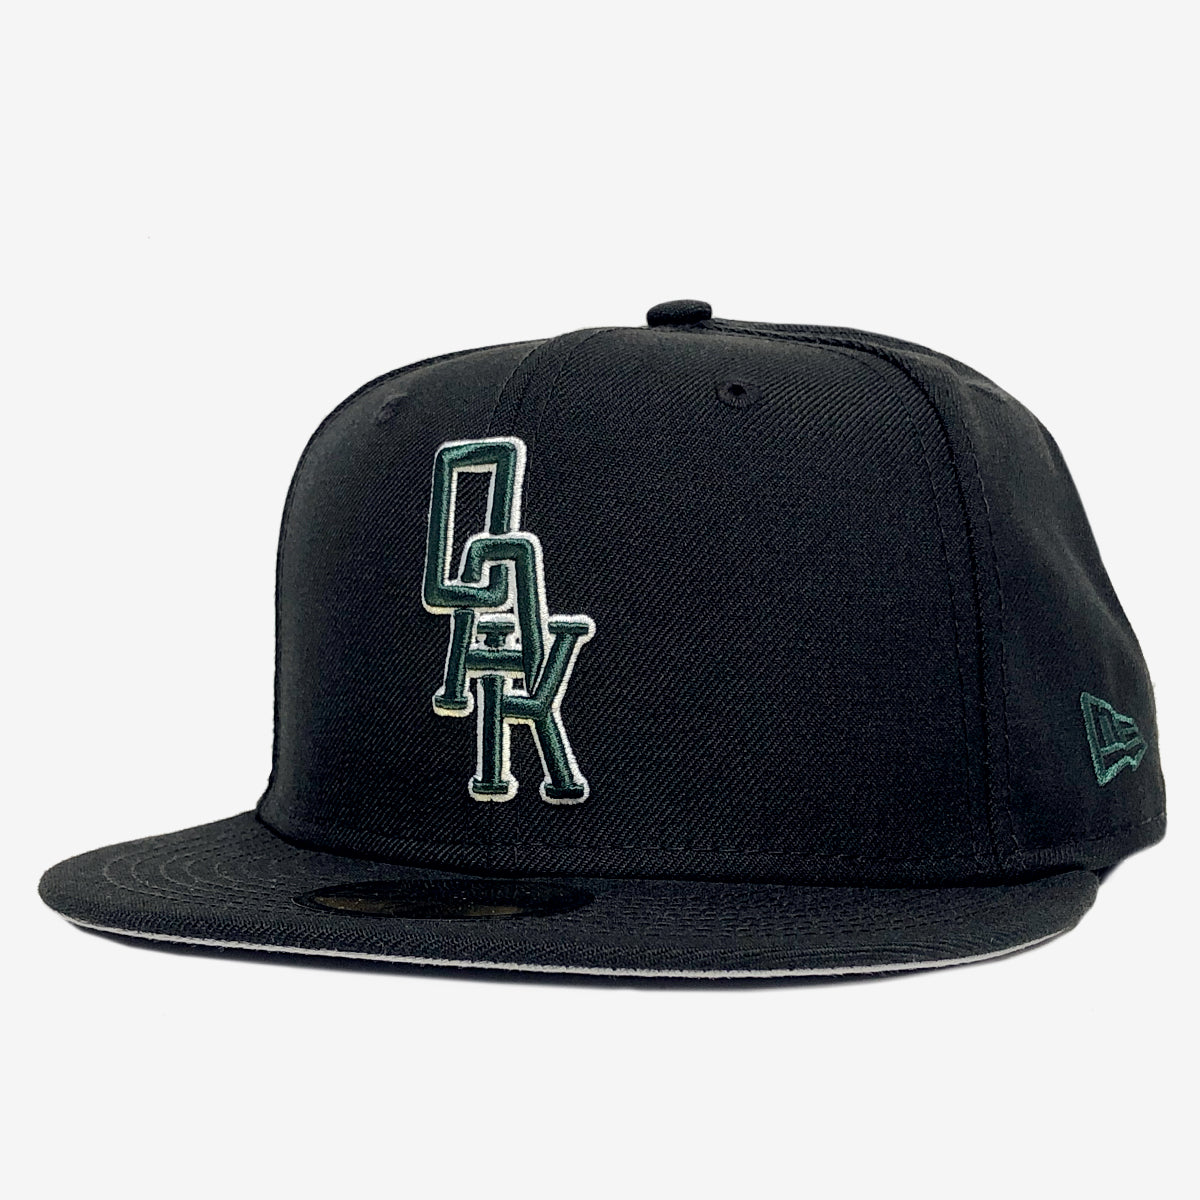 Black New Era cap with a green and white embroidered OAK wordmark on the crown. 